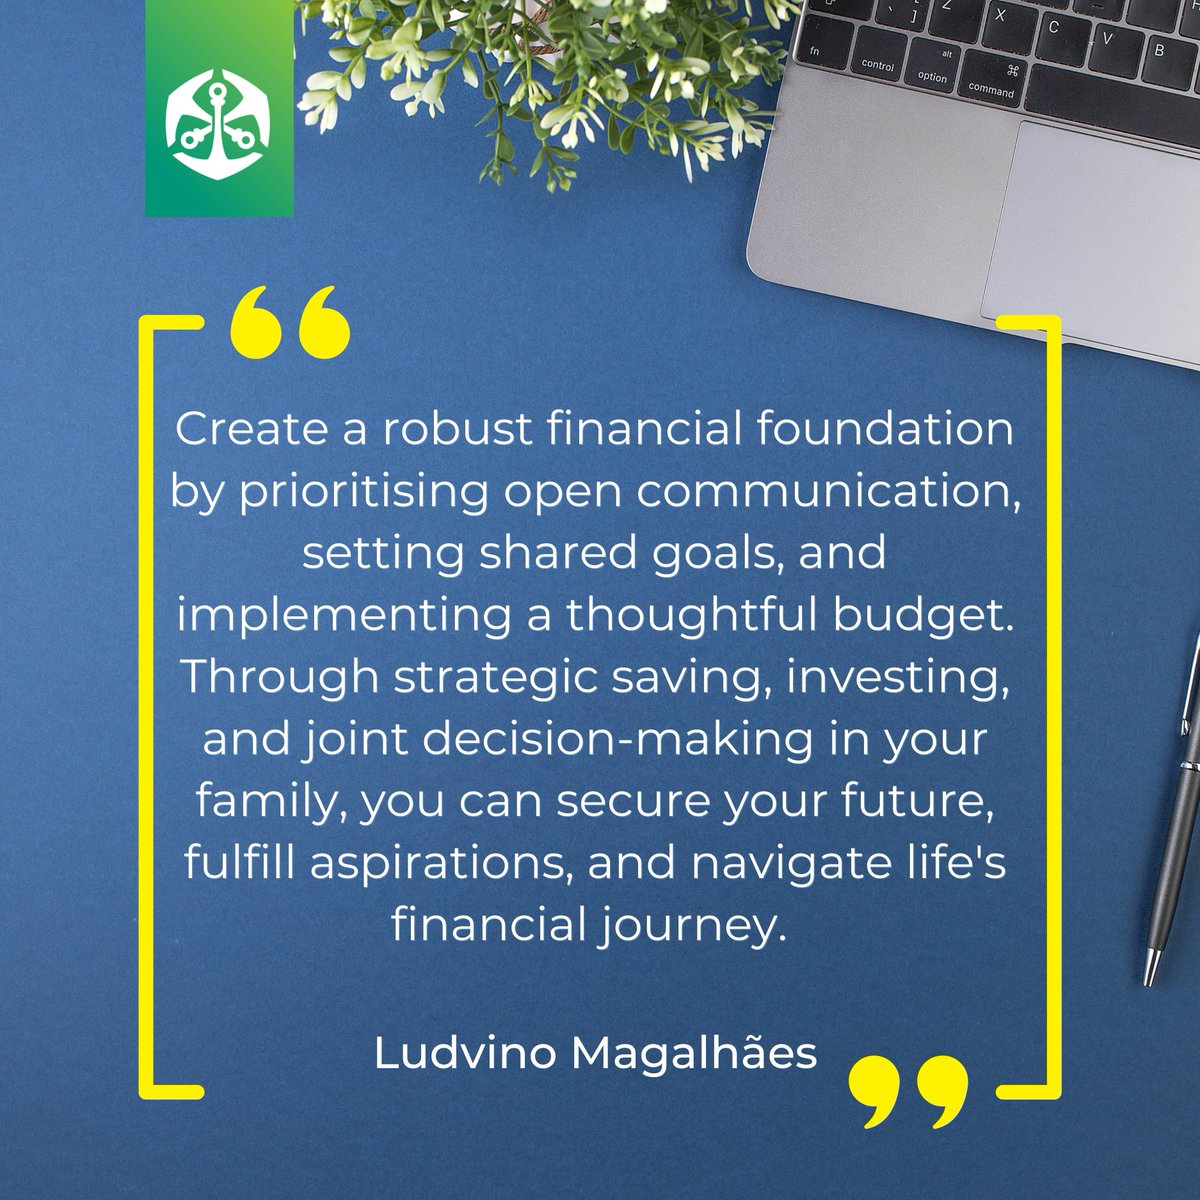 It's Wednesday Financial Insights time!

Building a strong financial foundation starts at home.  Ludvino Magalhães emphasises open communication, shared goals and budgeting as the keys to success.

Together, you can achieve anything!

#FamilyFinance #FinancialSecurity…